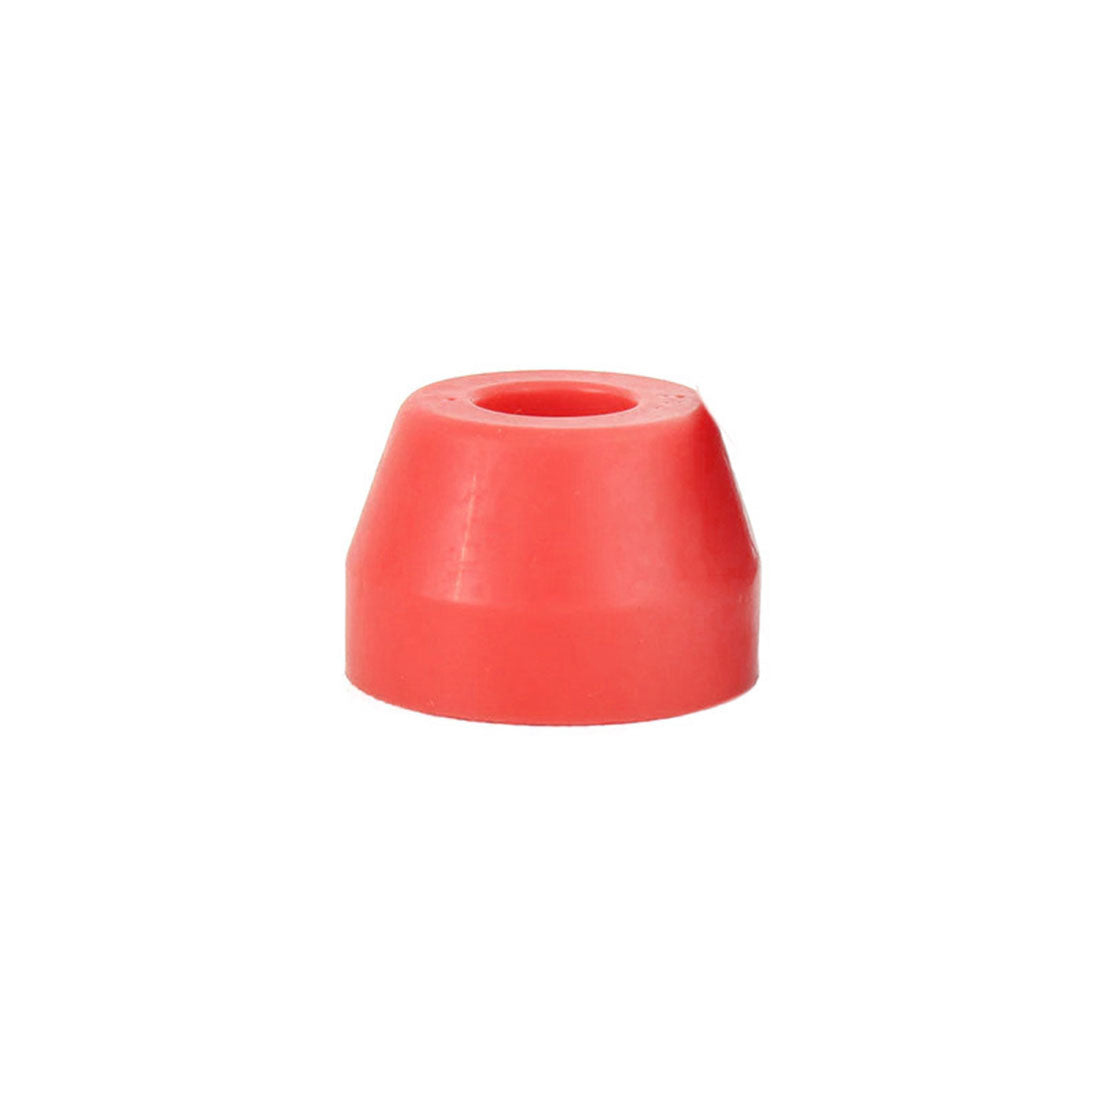 ABEC 11 Reflex Conical Bushing - Single .650&quot; 92a - Red Skateboard Hardware and Parts